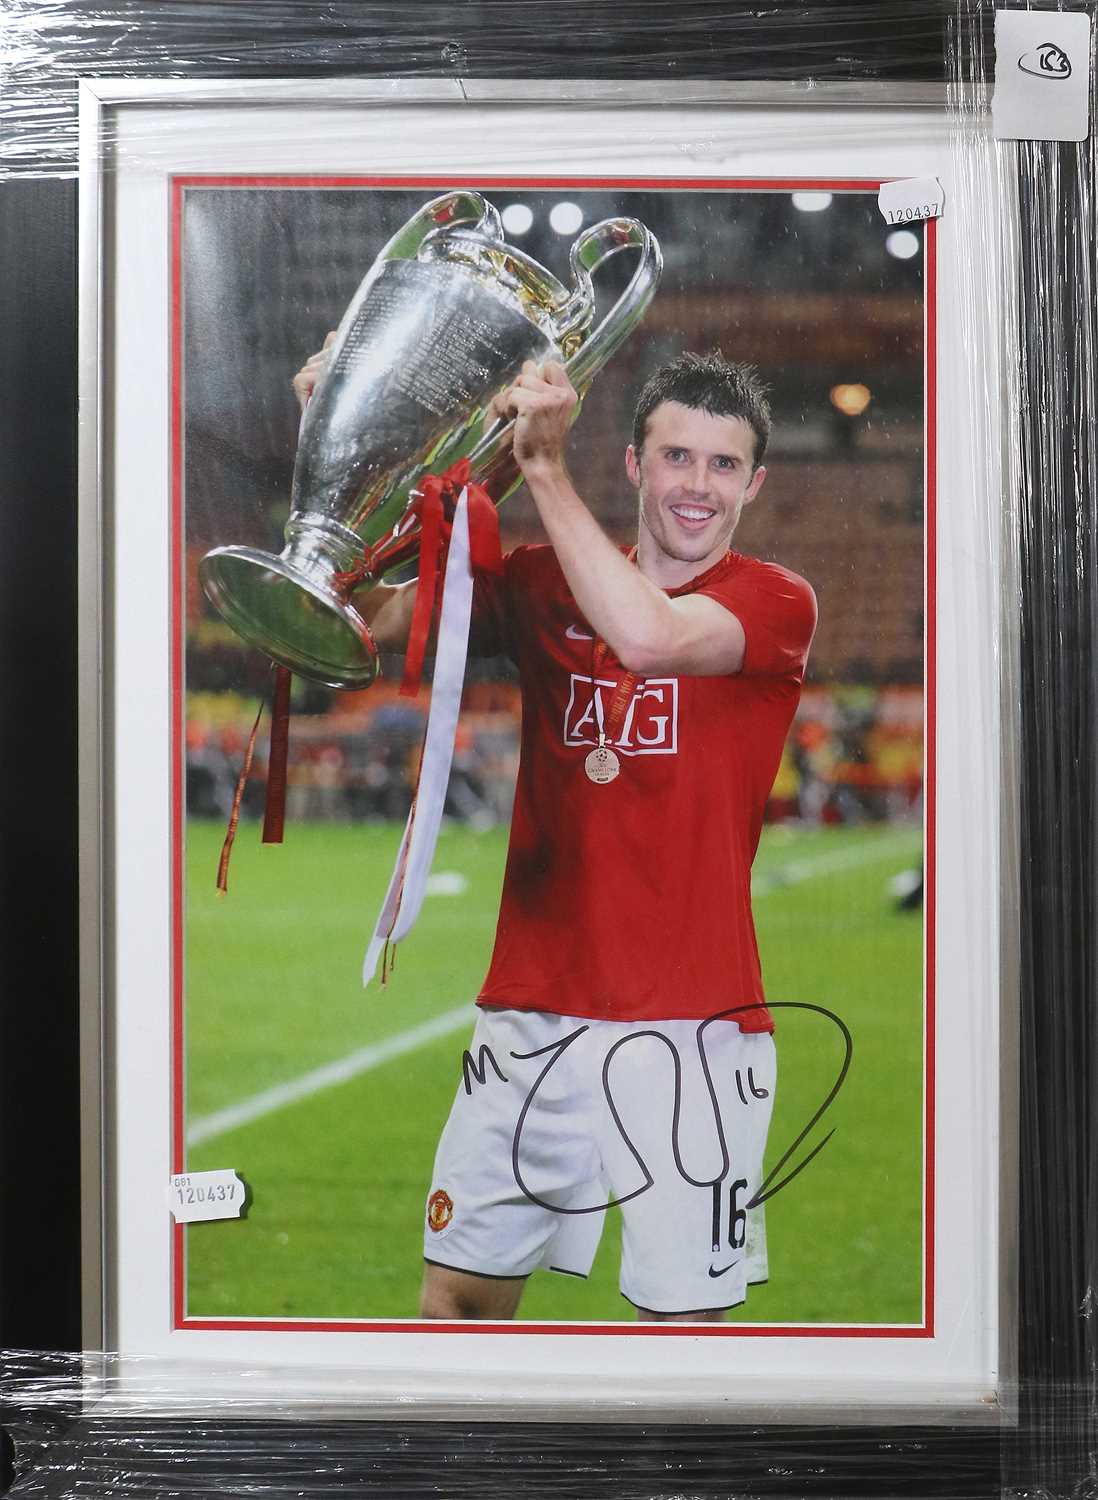 Manchester United Related Items - Image 4 of 8